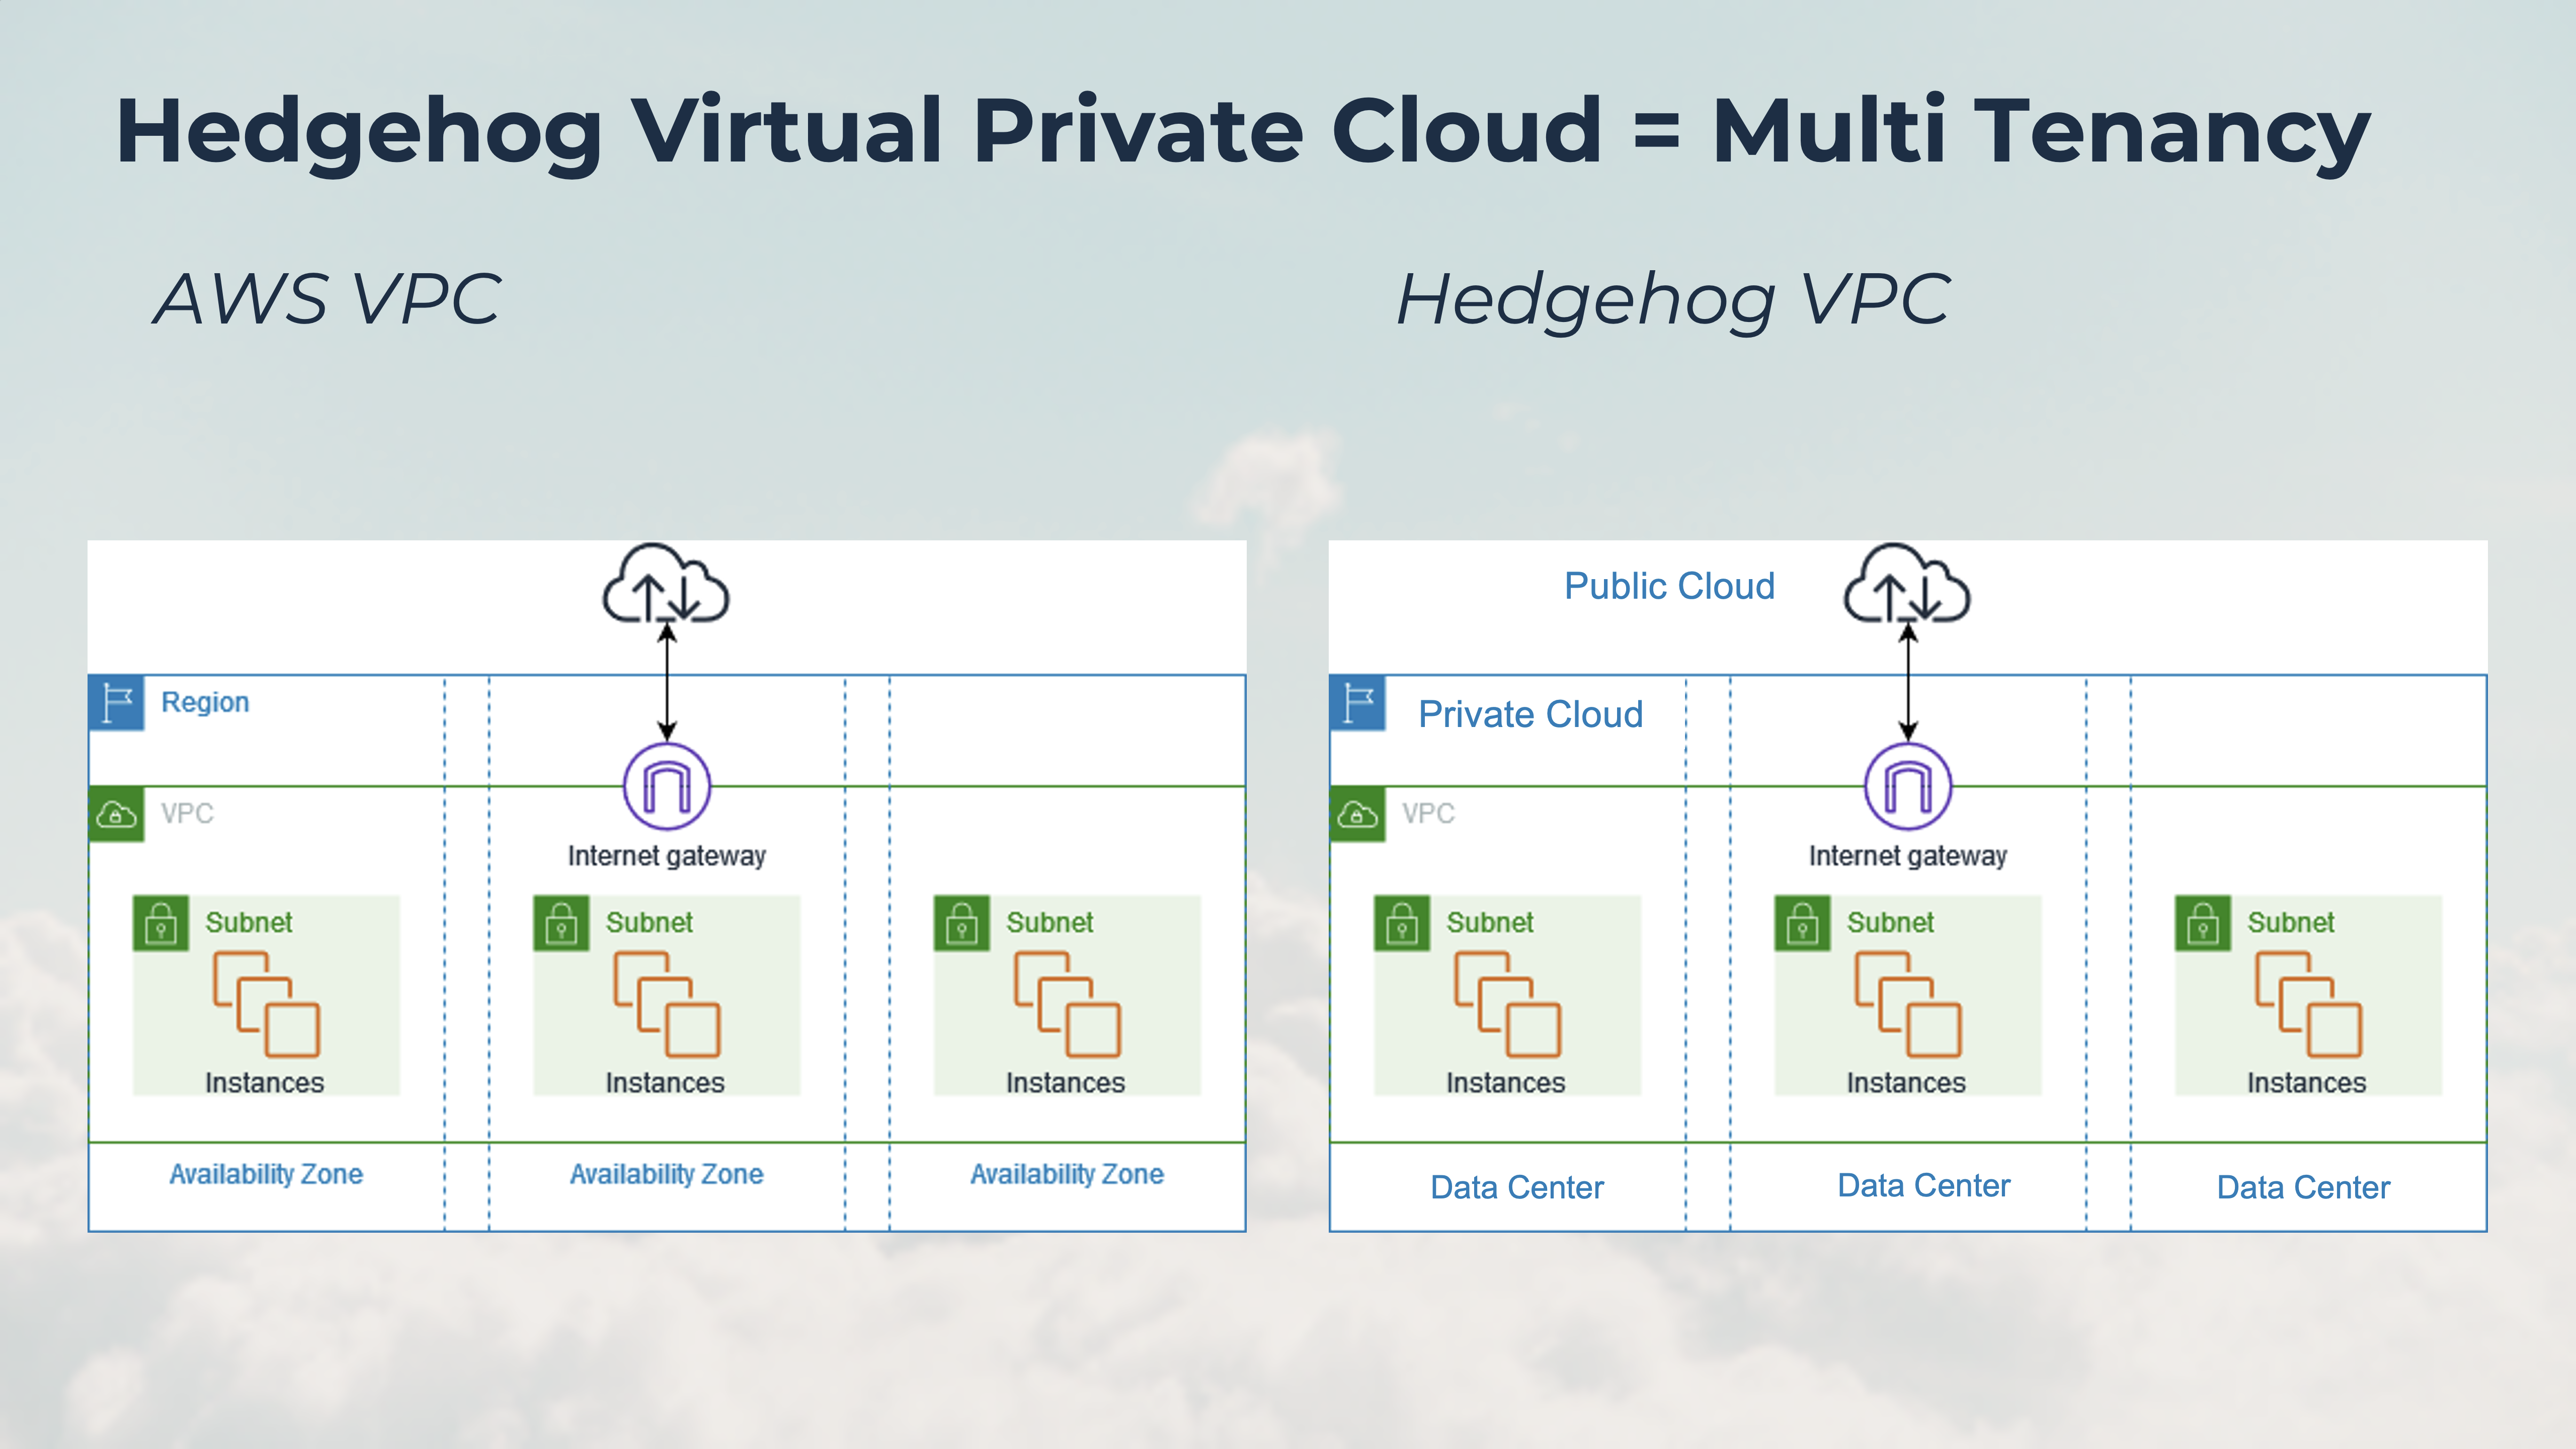 Diagraming Hedgehog Virtual Private Cloud compared to AWS Virtual Private Cloud. Hedgehog VPC is the same as AWS VPC, but it runs on private cloud where data centers are the same as availability zones and the VPC gateway connects private cloud to public cloud